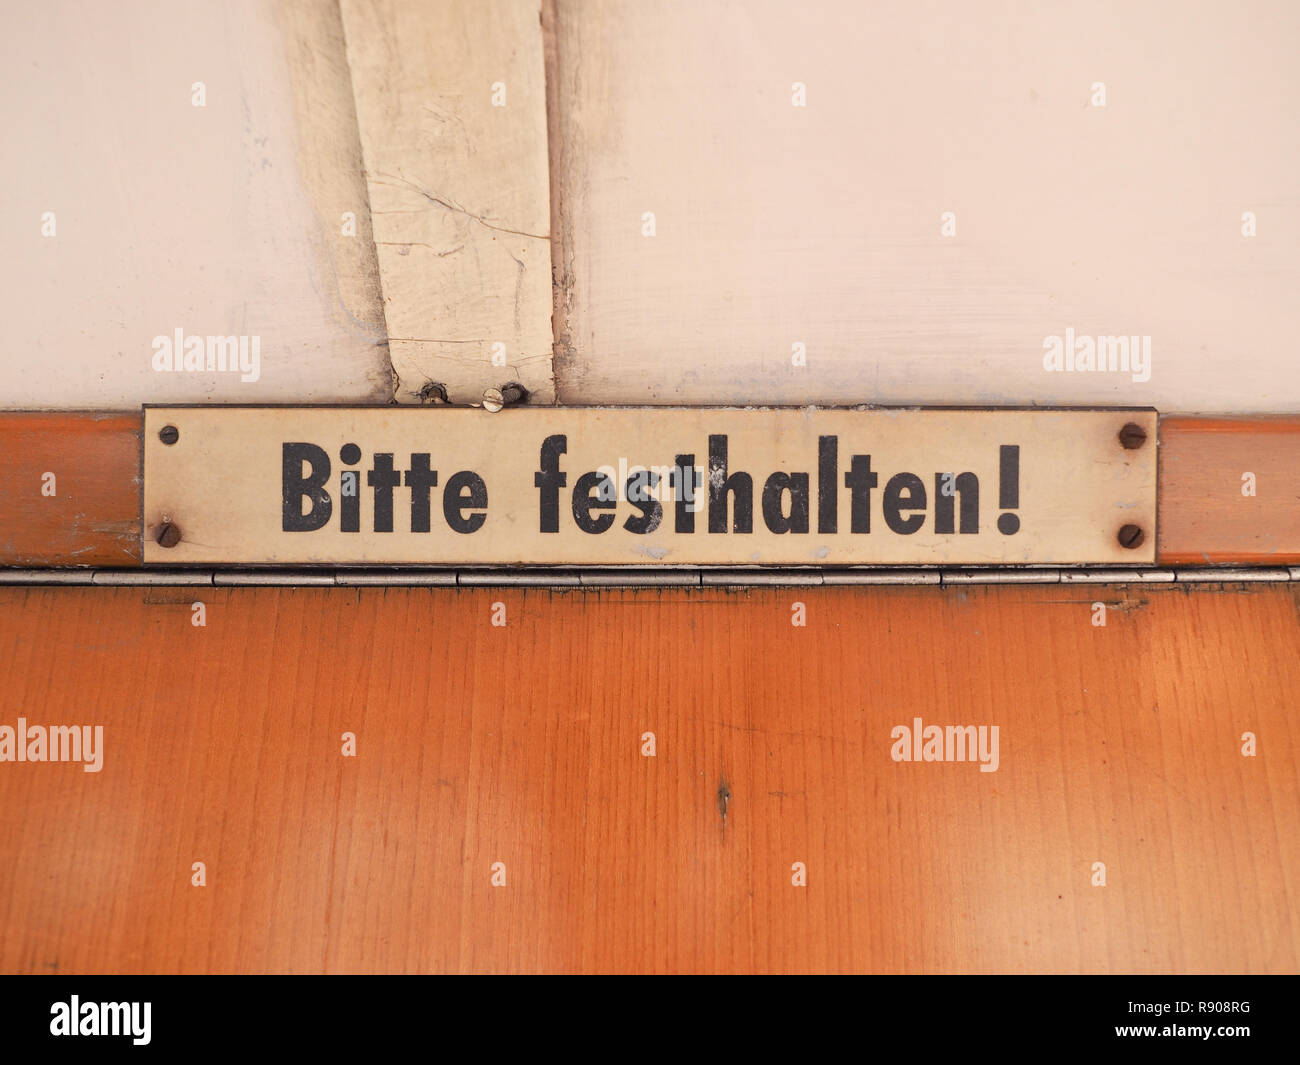 Bitte festhalten (meaning Please hold tight) sign on vintage German tram Stock Photo